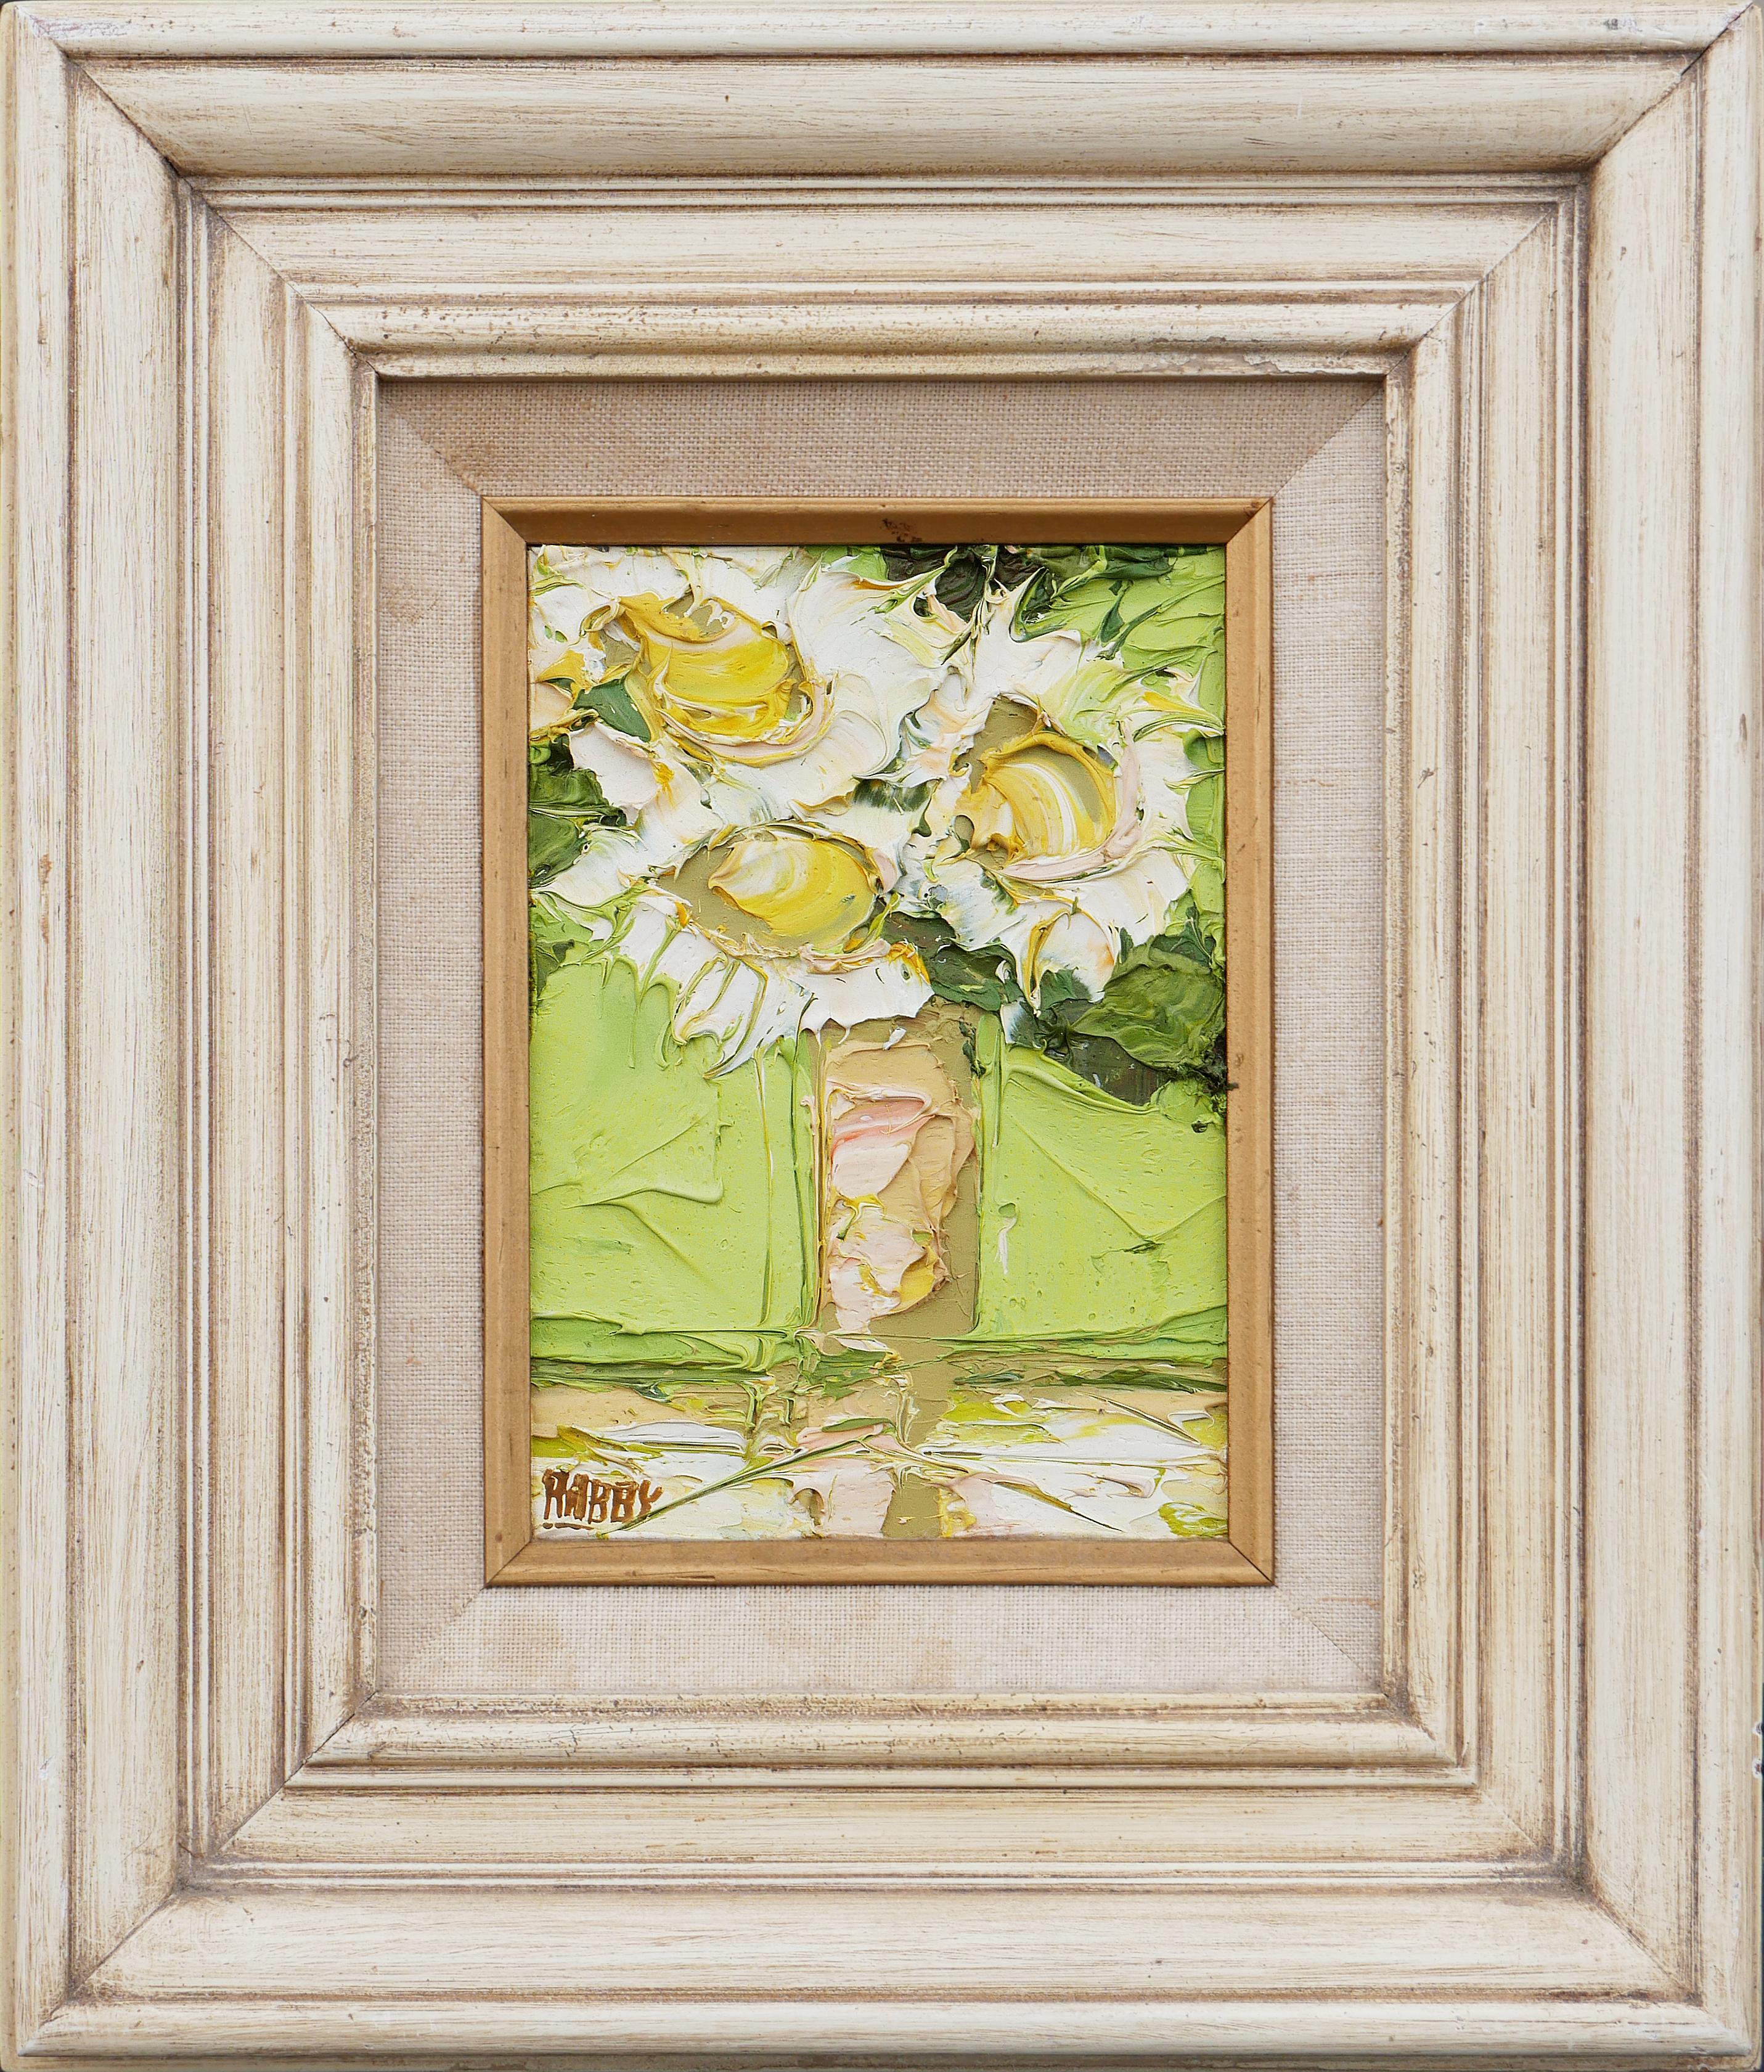 Jim Rabby Abstract Painting - Modern Abstract Green, Yellow, and White Flowers Still Life Painting